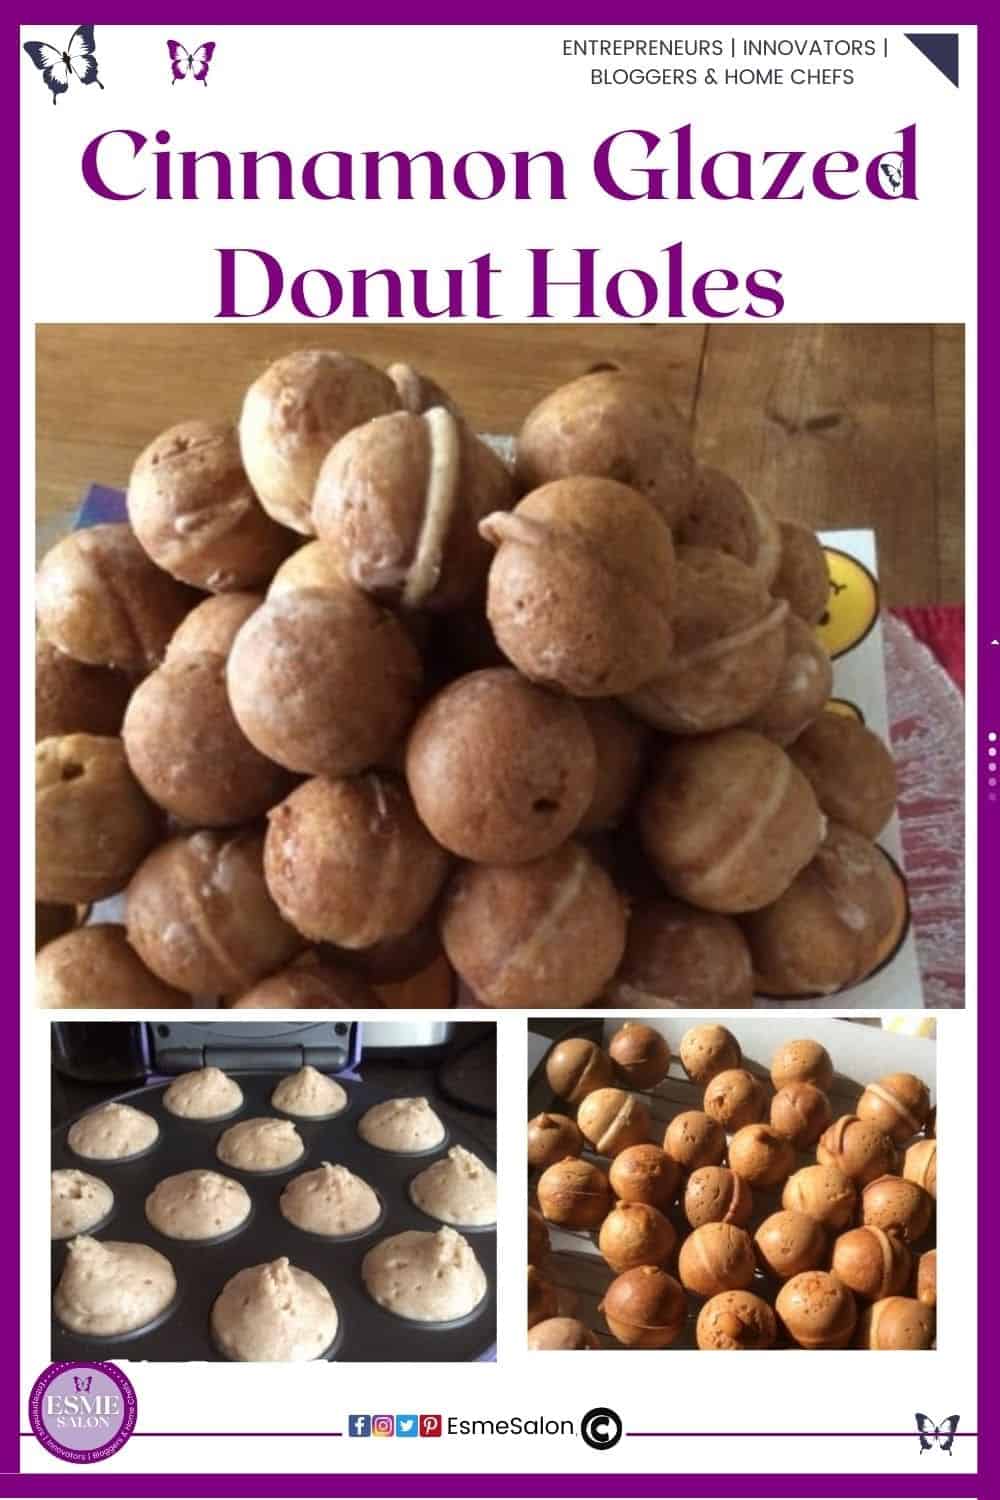 an image of a baking tray filled with Cinnamon Glazed Donut Holes as well as some still raw in the small baby pop machine ready for baking